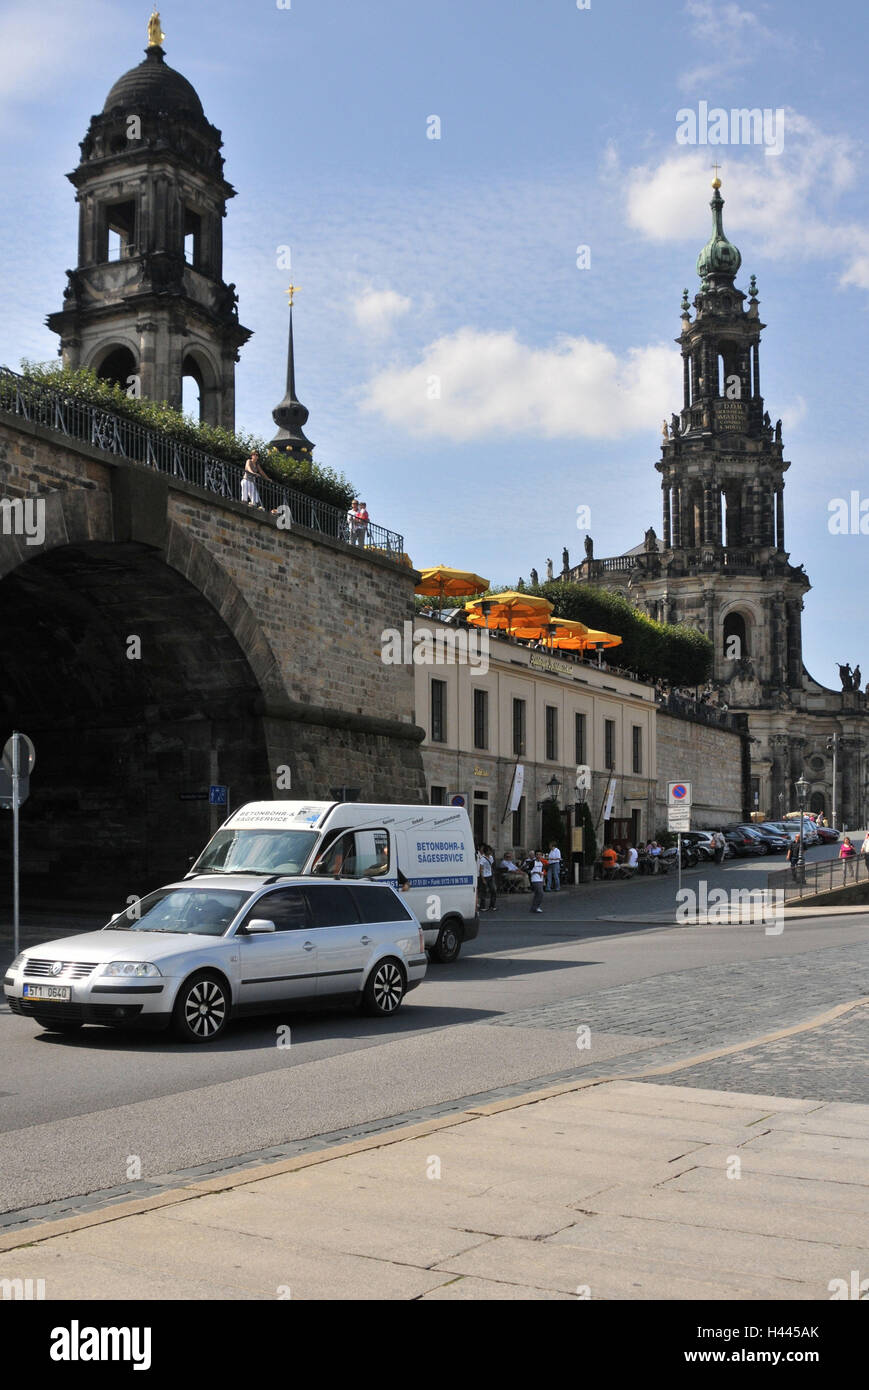 Brühlsche terrace, terrace shore, cathedral, internal Old Town, Dresden, Saxon, Germany, Stock Photo